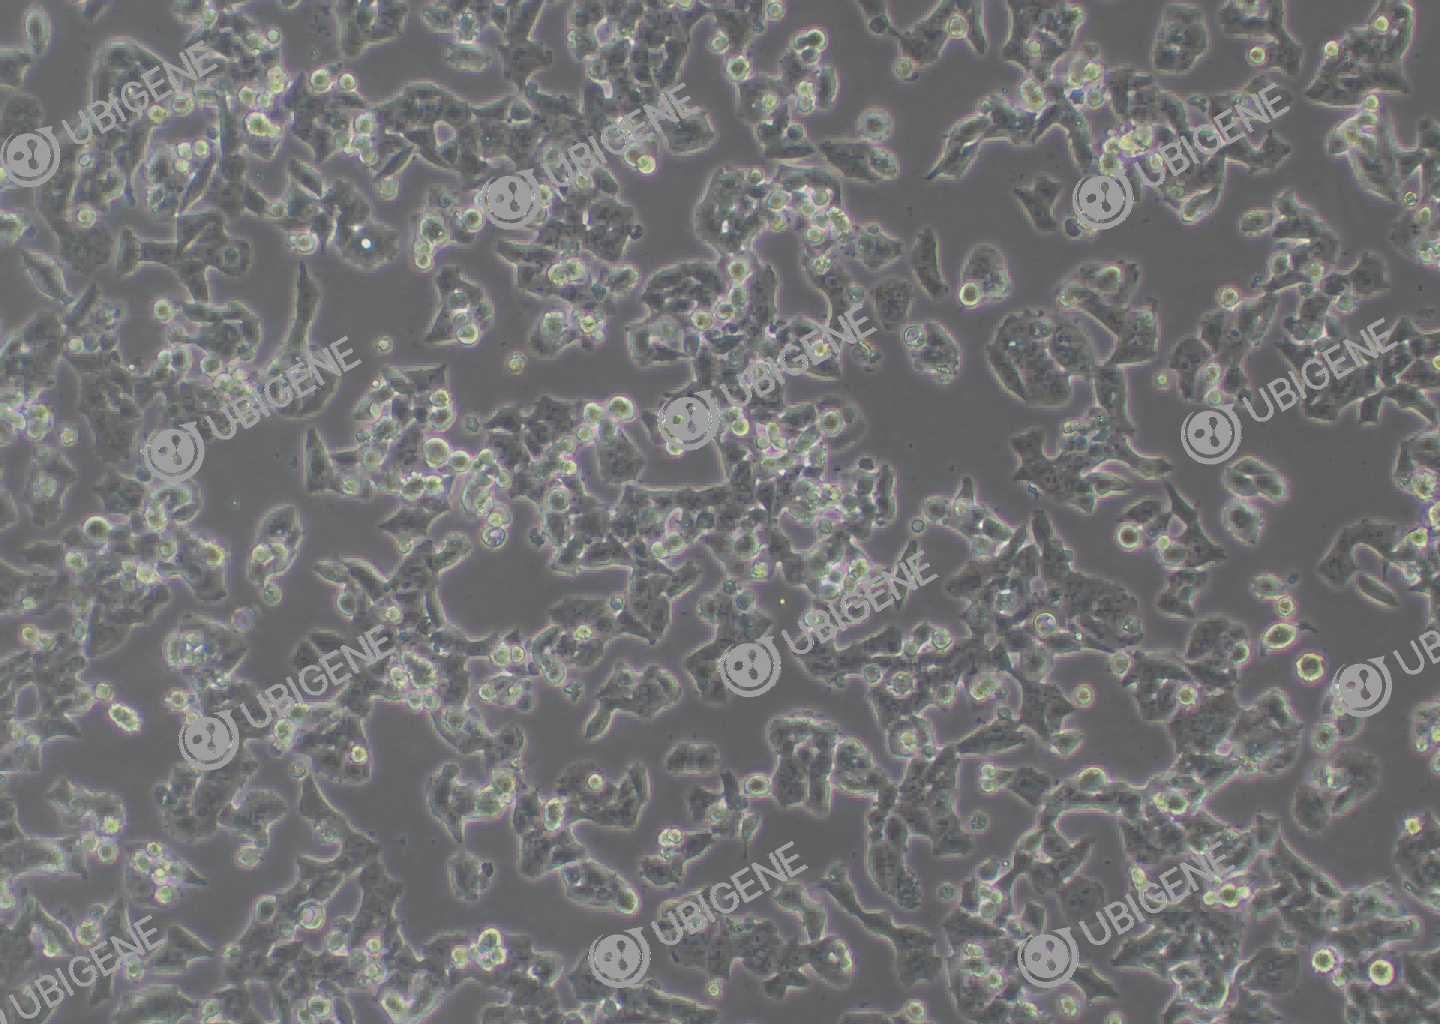 NCI-H520 cell line Cultured cell morphology